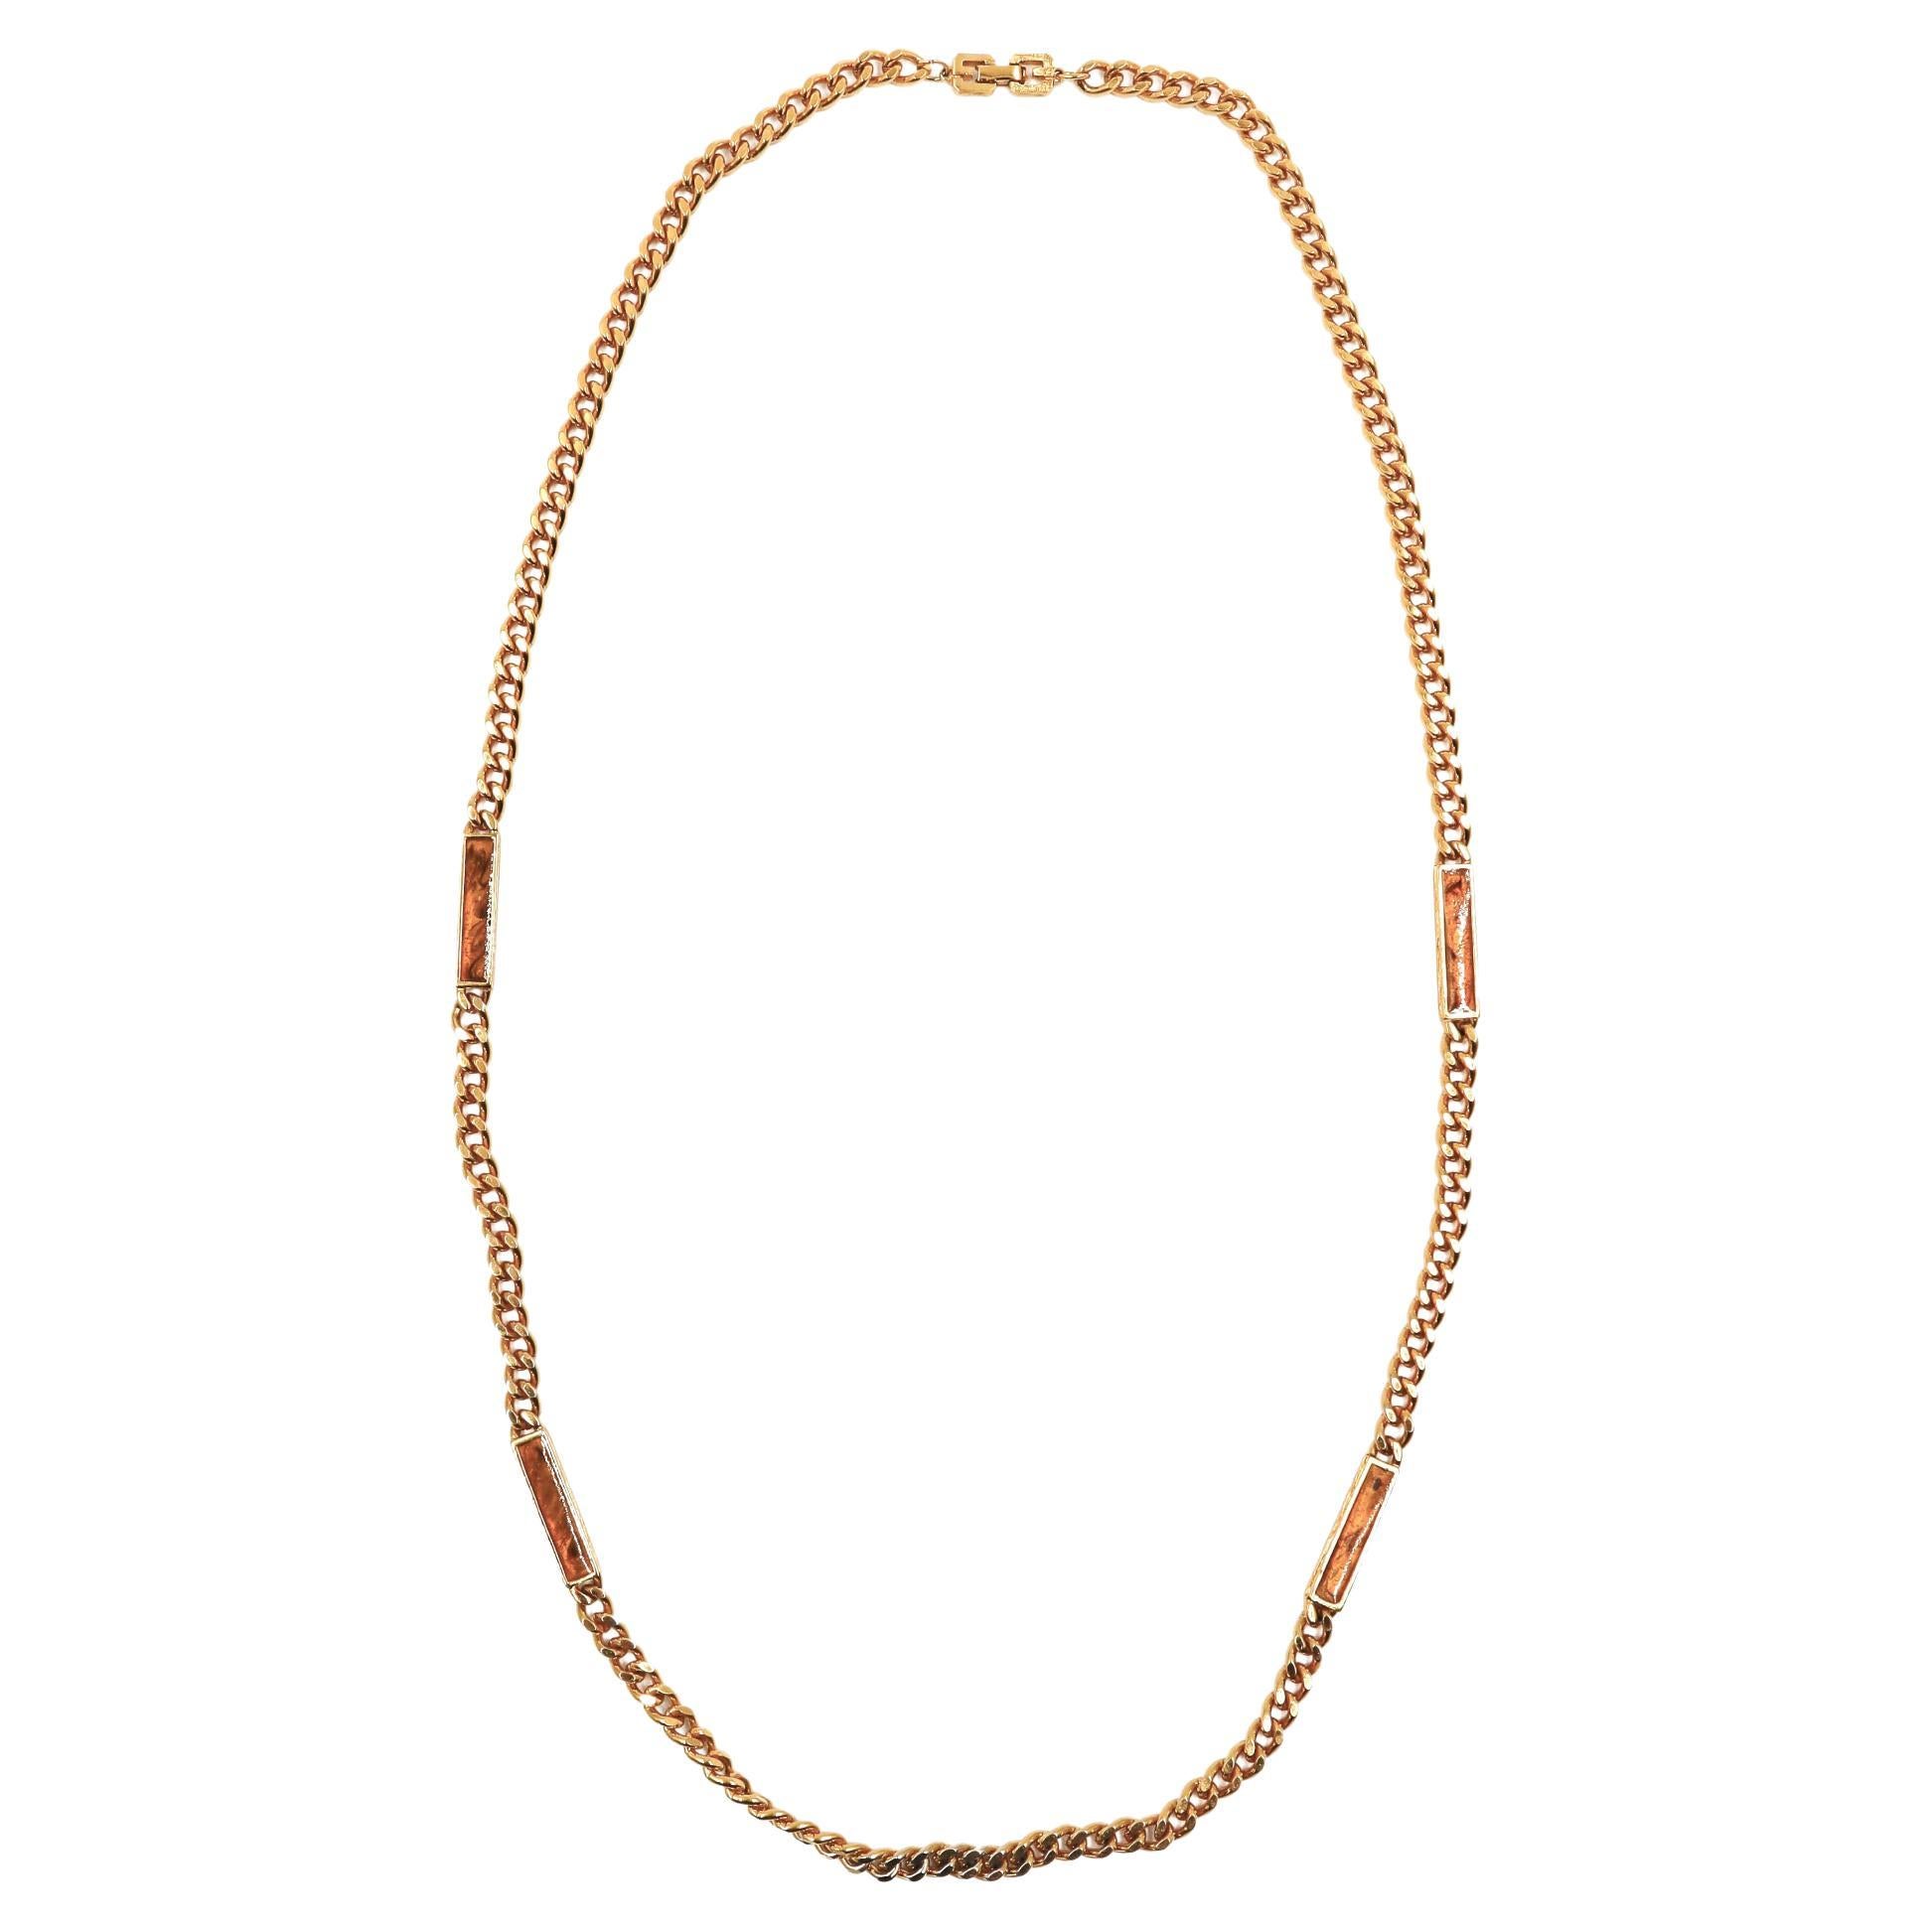 Givenchy Vintage ENAMEL Gold Long CHAIN NECKLACE